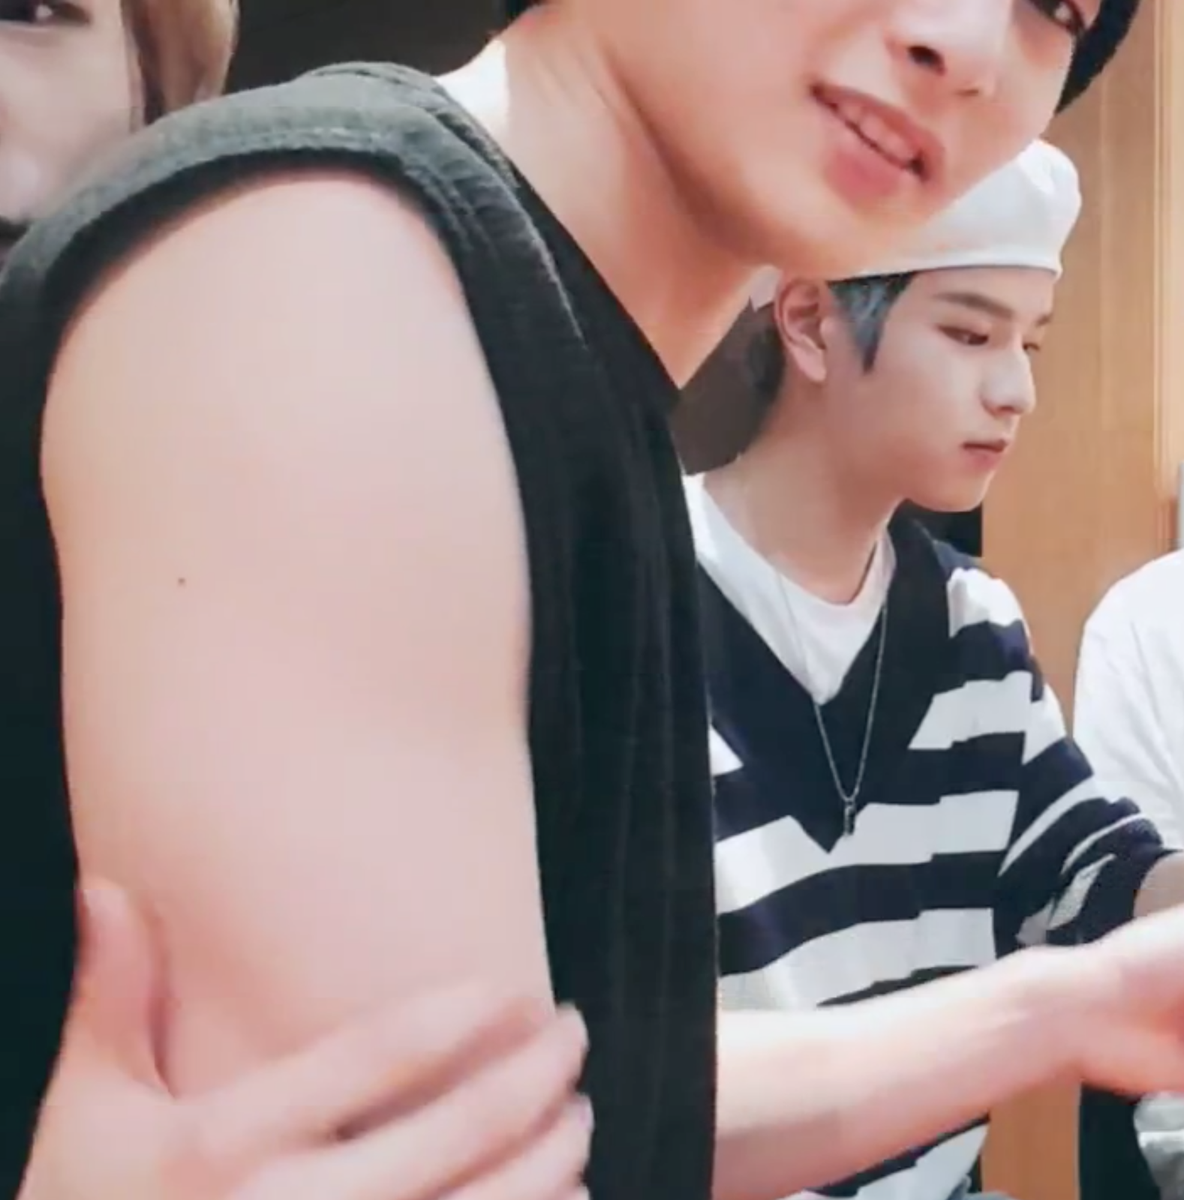 jeongin resorted to a beanie now insteadbut then he freaked out seeing his arm right in front of the camera and went behind camera haha  https://twitter.com/shmesm2/status/1287044355190960130